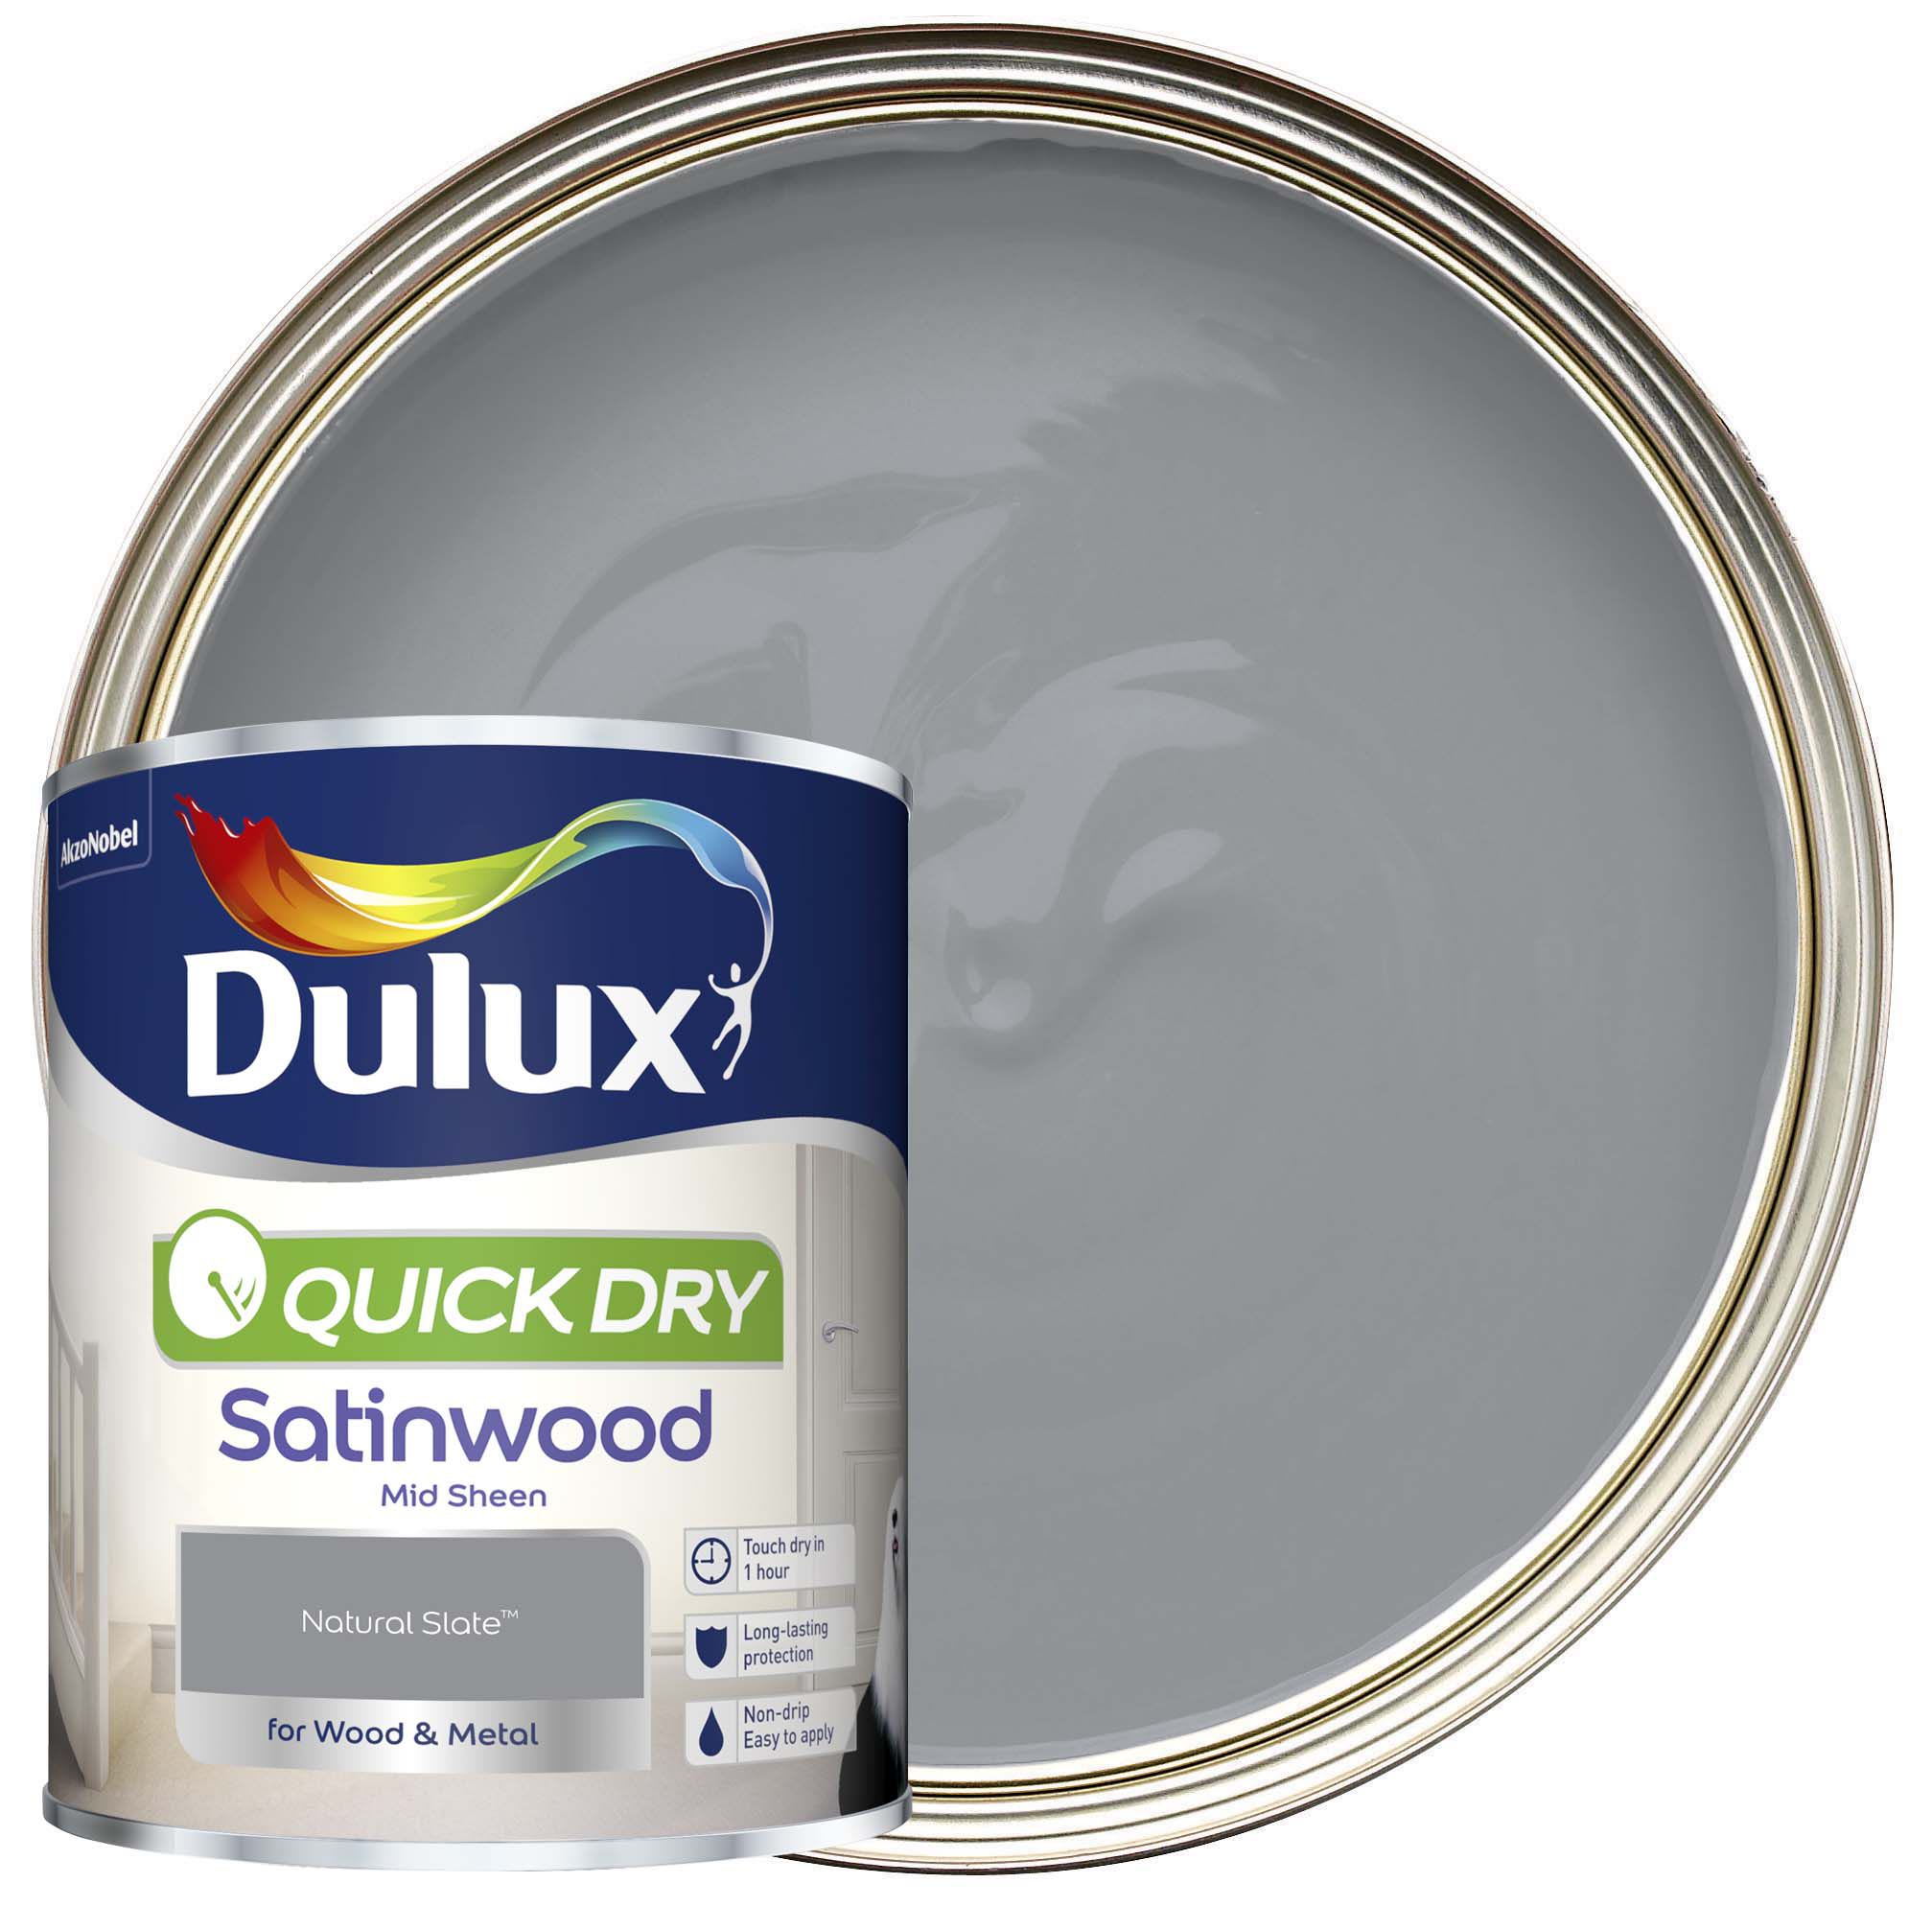 Dulux Quick Dry Satinwood Paint - Natural Slate